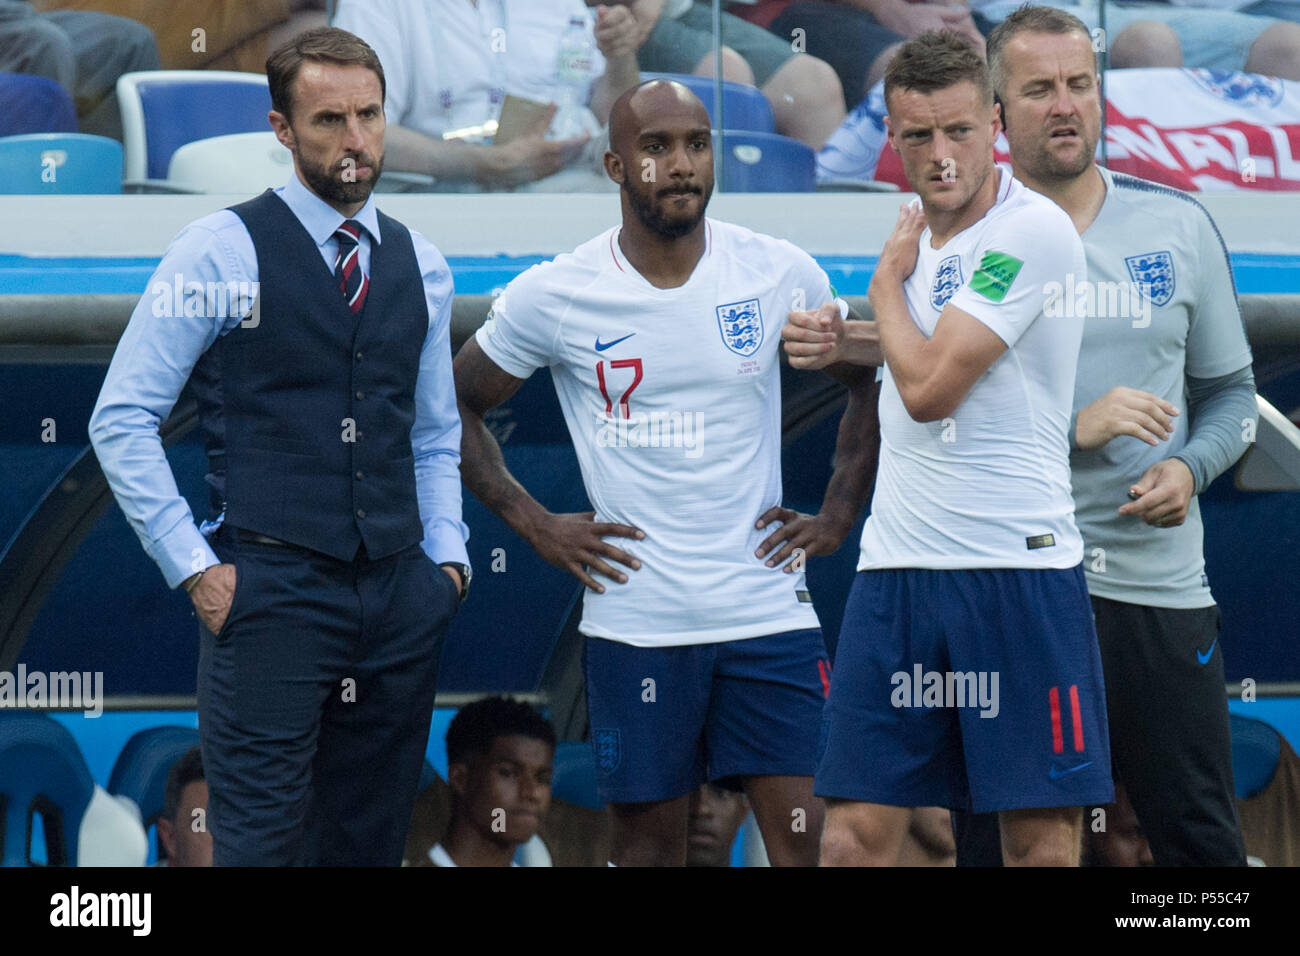 Gareth SOUTHGATE (left, coach, ENG) brings Fabian DELPH (2nd from left, ENG) and Jamie VARDY (ENG), substitution, full figure, reserve, half figure, half figure, England (ENG) - Panama (PAN ) 6: 1, preliminary round, group G, match 30, on 24.06.2018 in Nizhny Novgorod; Football World Cup 2018 in Russia from 14.06. - 15.07.2018. | usage worldwide Stock Photo